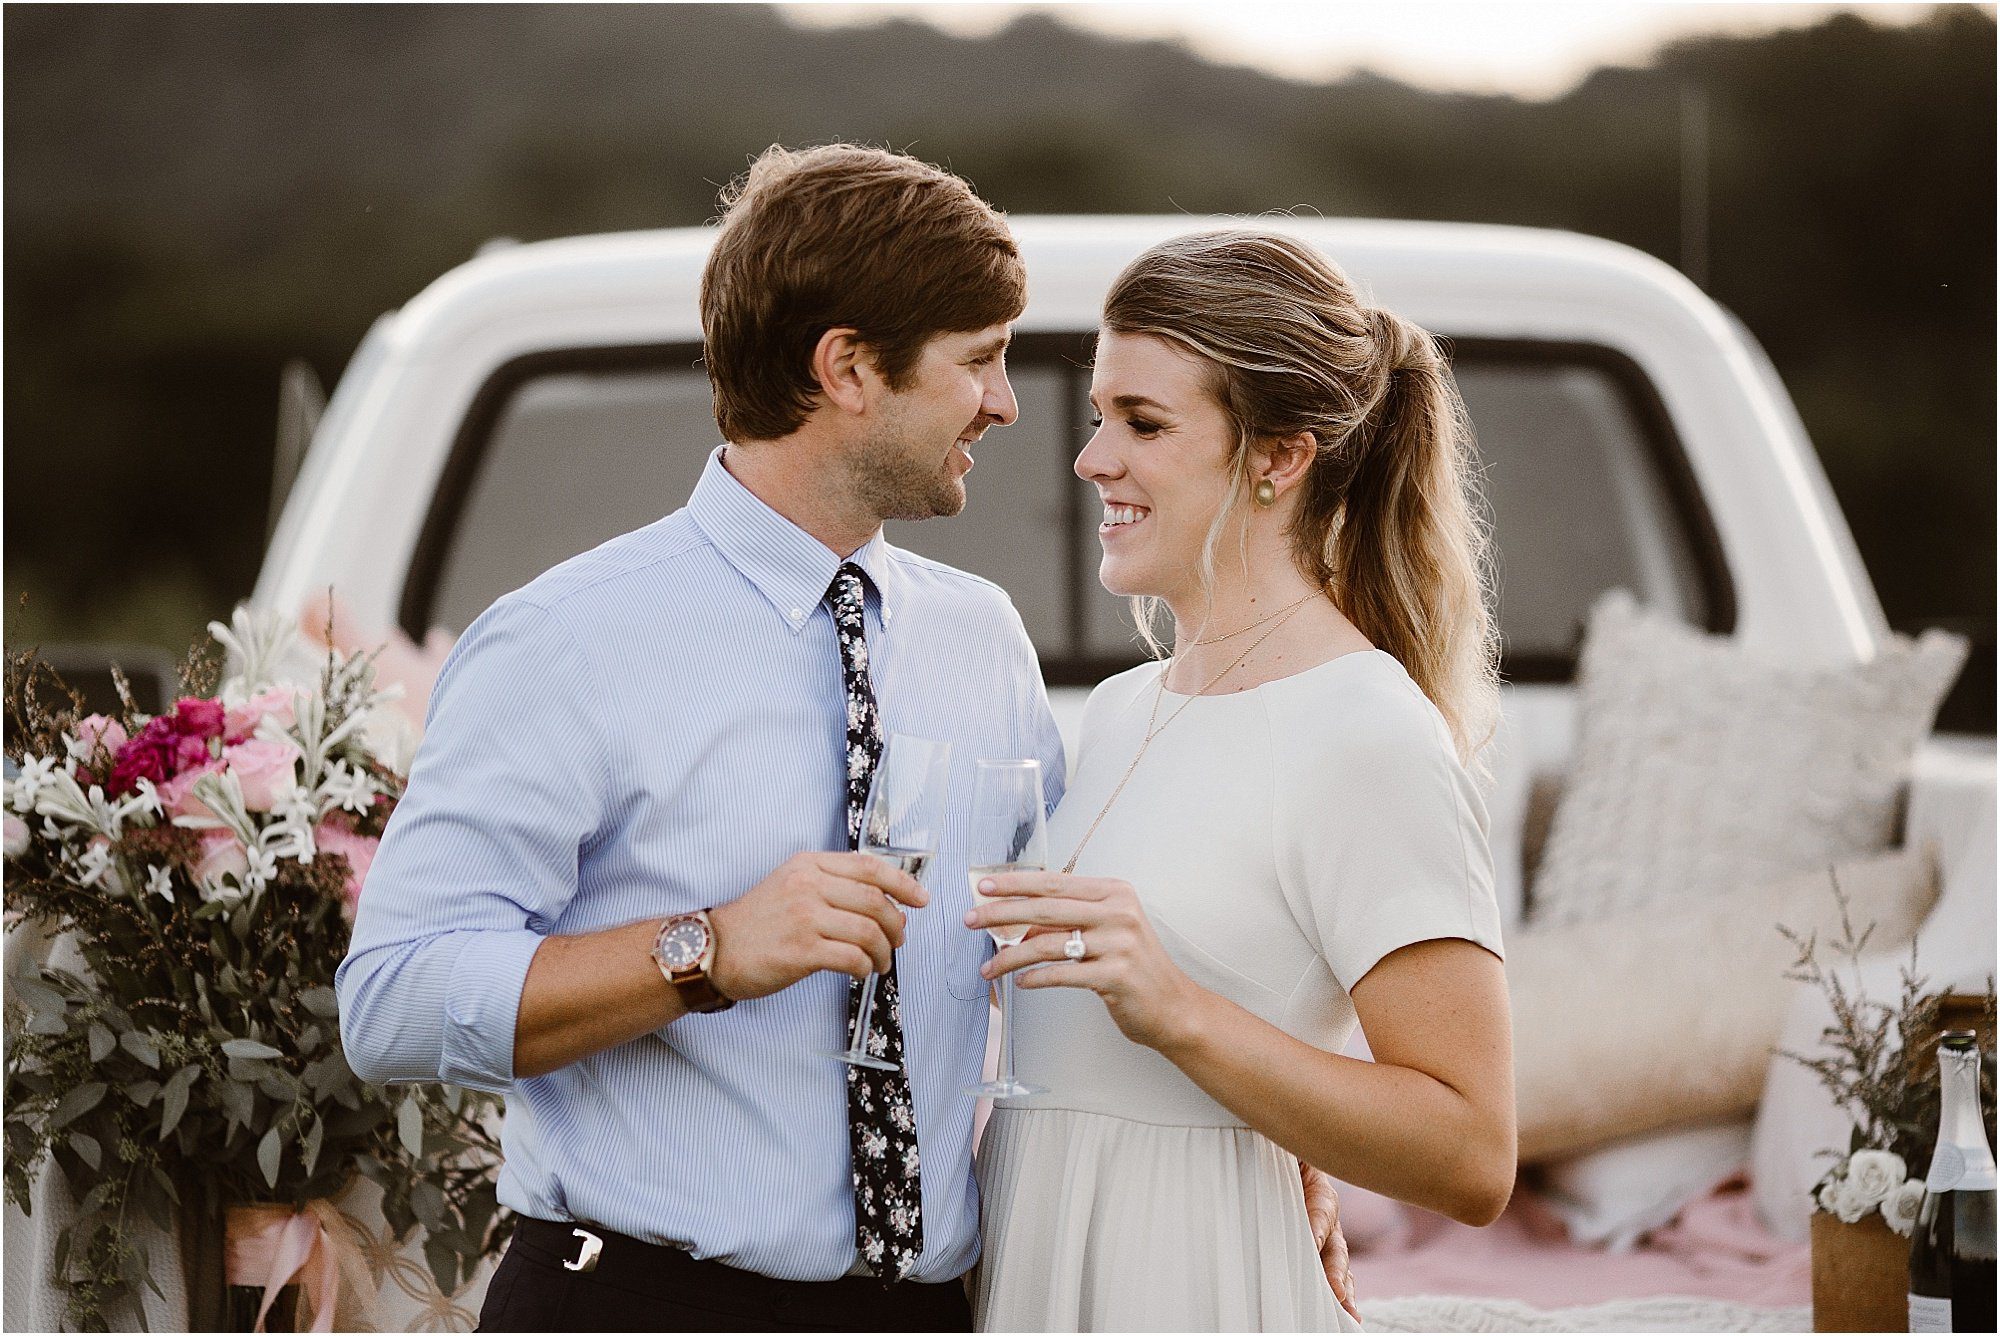 Vintage Truck Vow Renewal Photography in Knoxville 